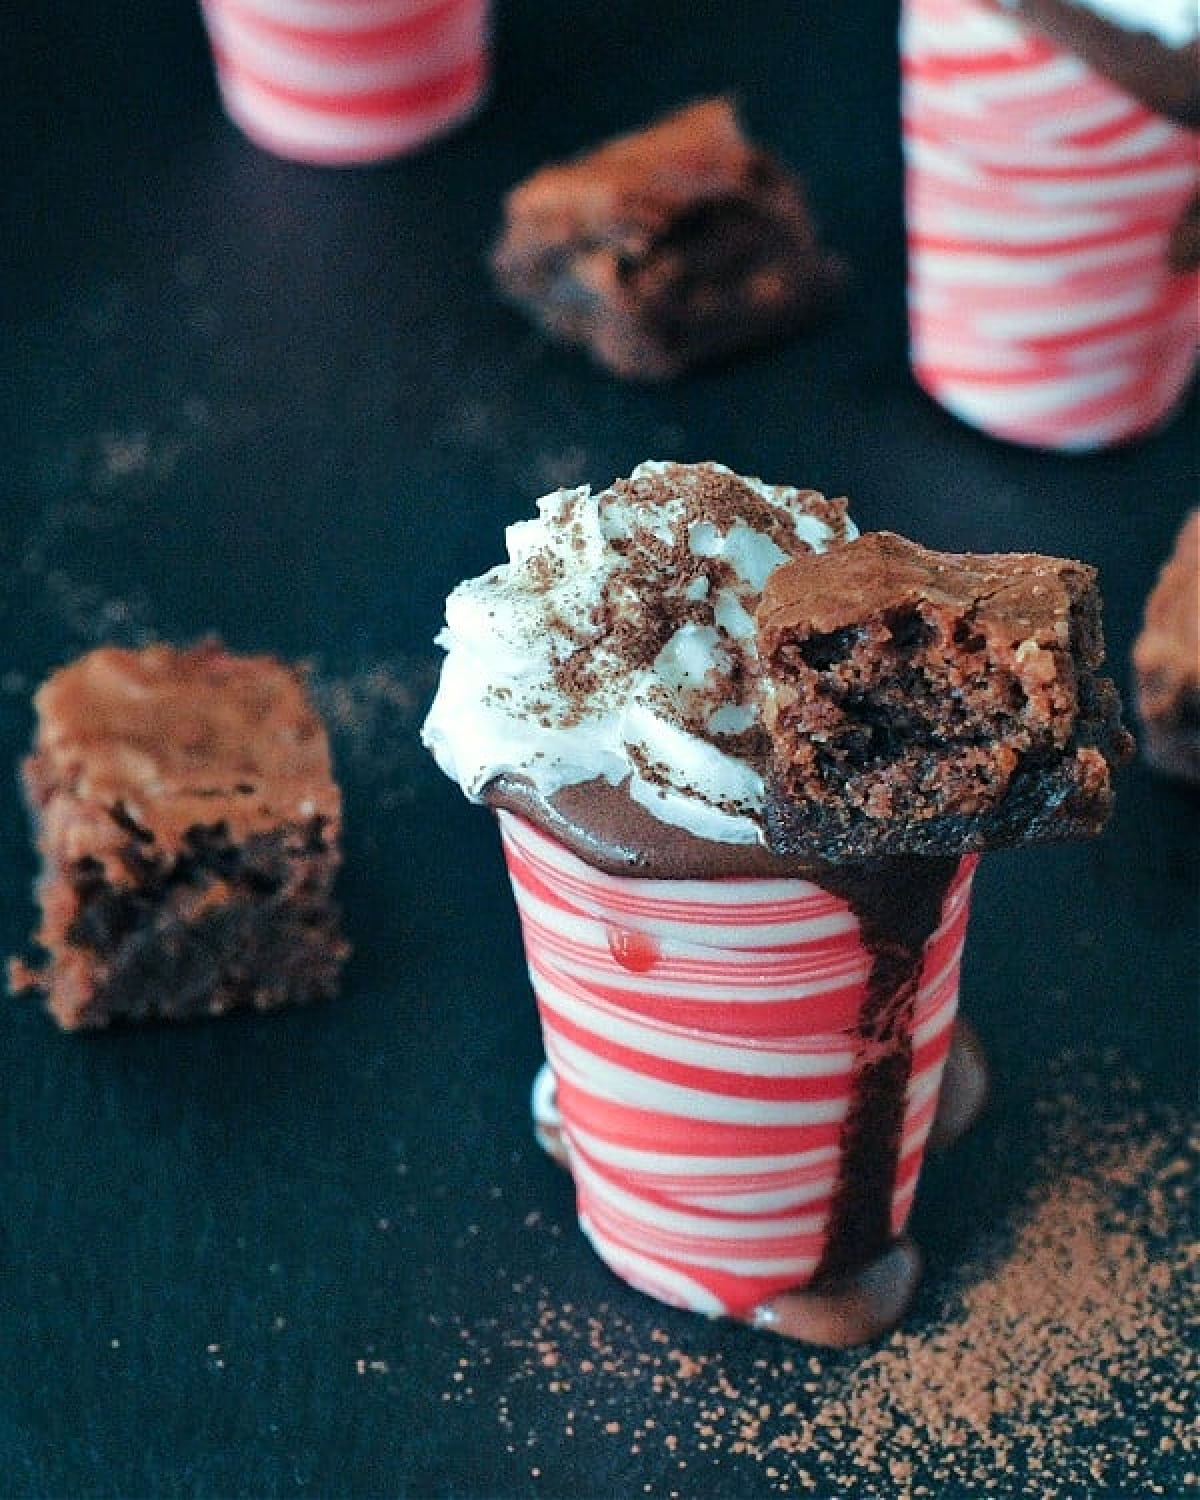 Hot chocolate peppermint shots: hot chocolate in an edible peppermint candy shot glass, topped with whip cream and a small brownie square.